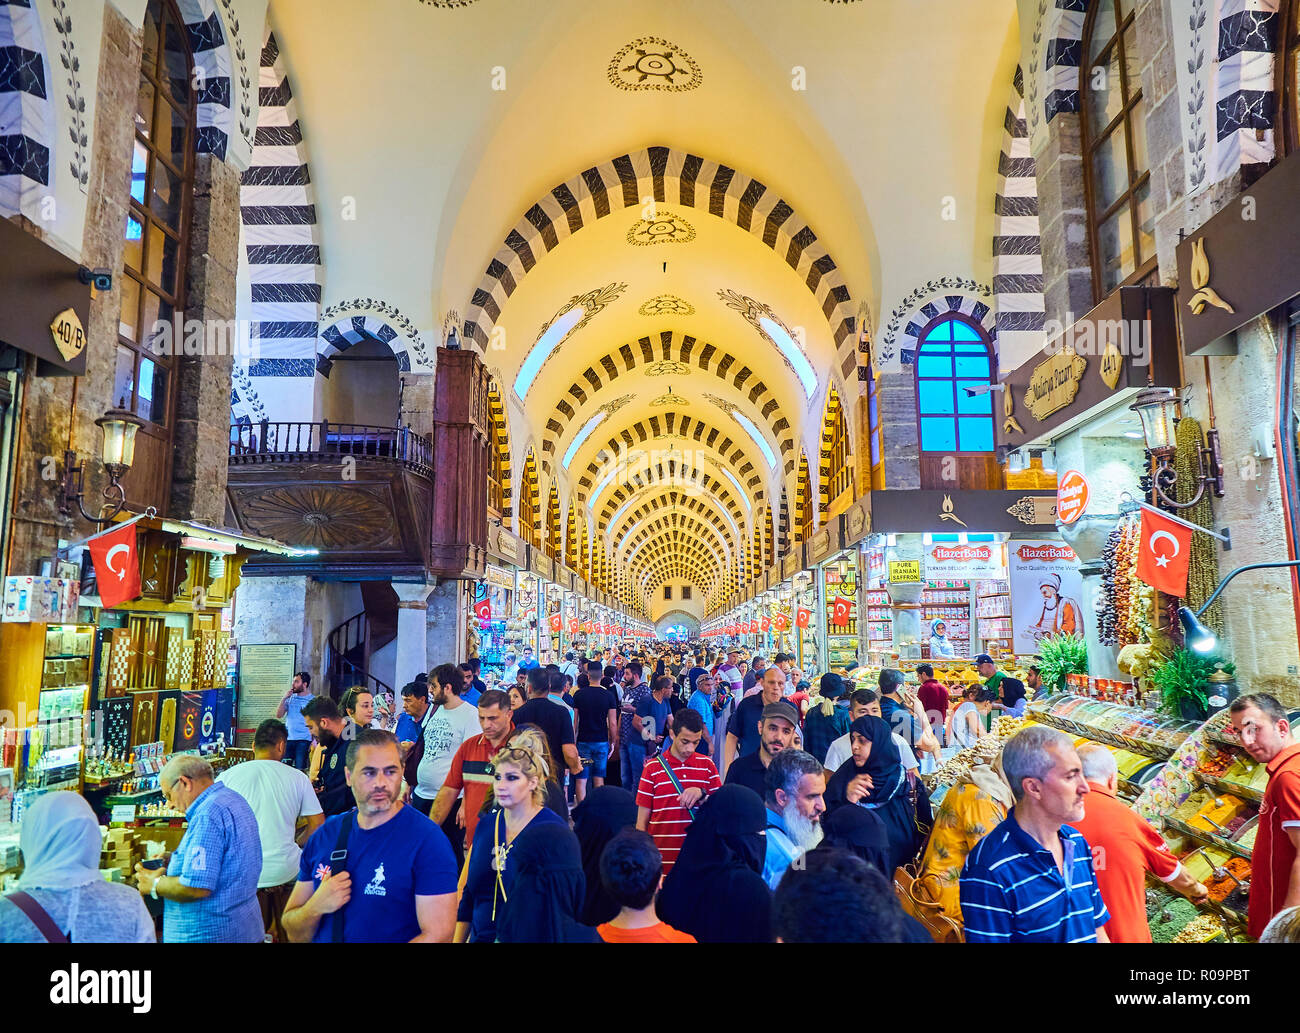 Tourists in Misir Carsisi, the spice bazaar of Eminonu district, Istanbul, Turkey. Stock Photo